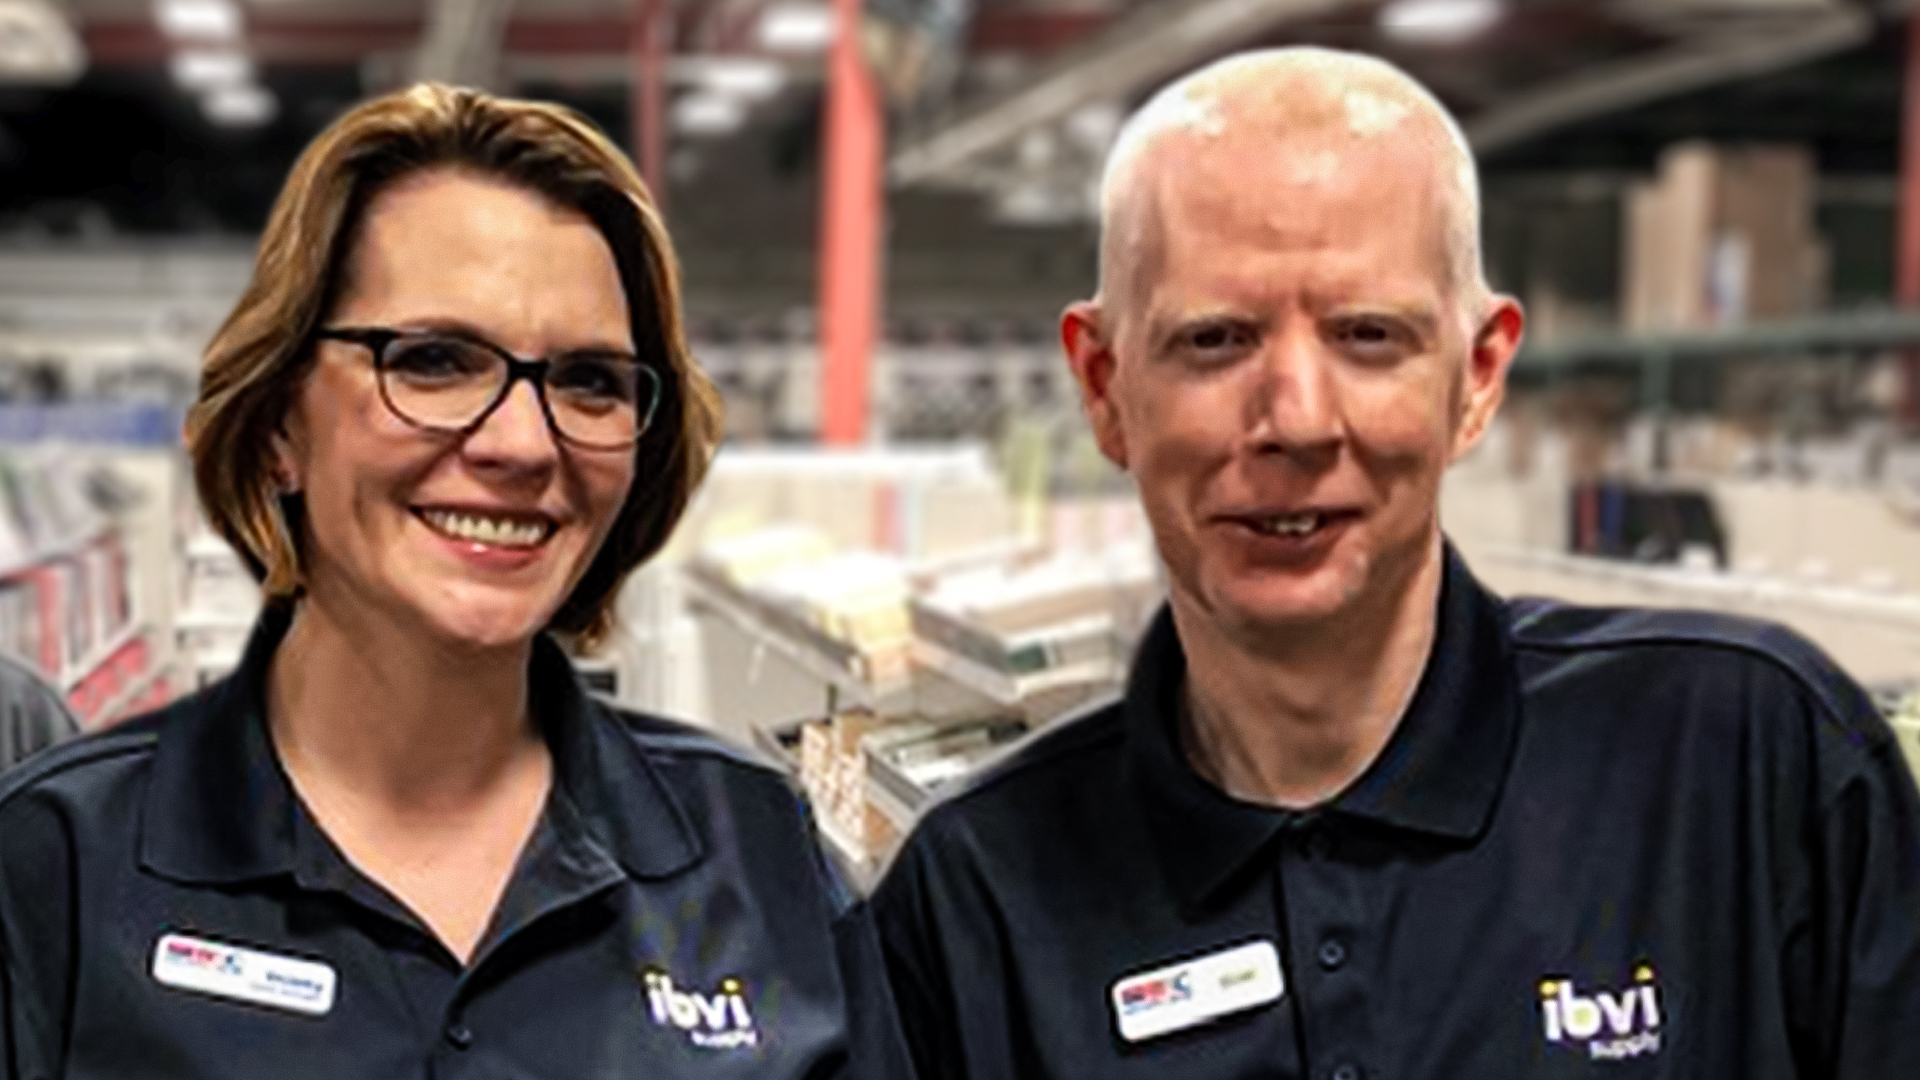 Two IBVI employees smiling